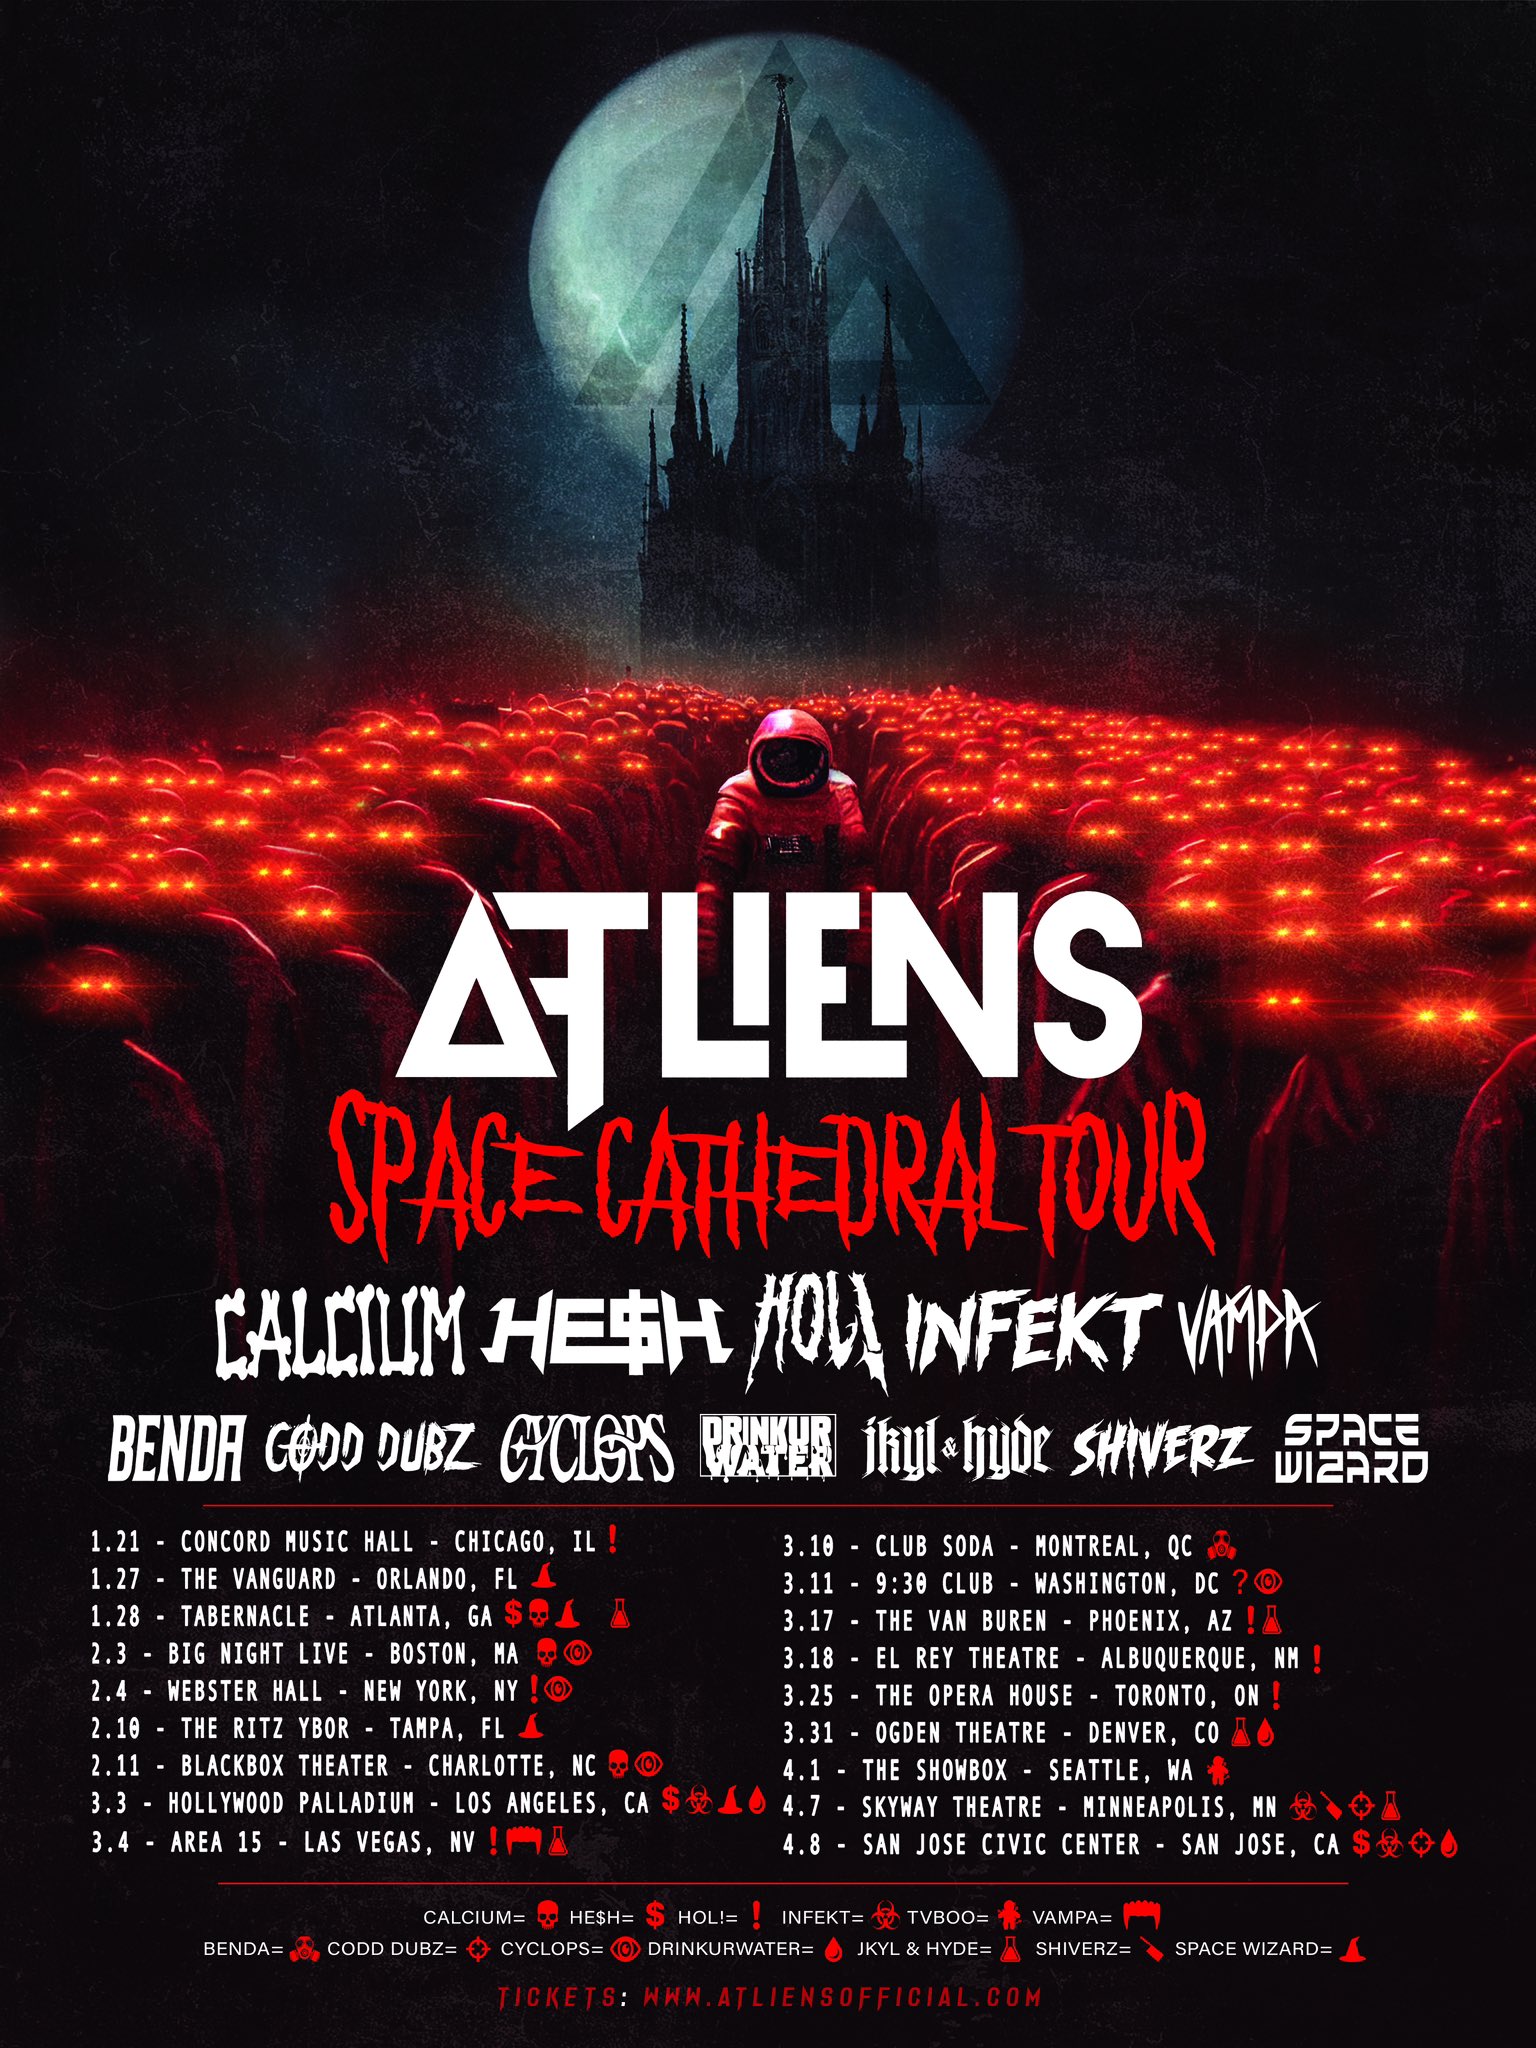 atliens-space-cathedral-tour-charlotte